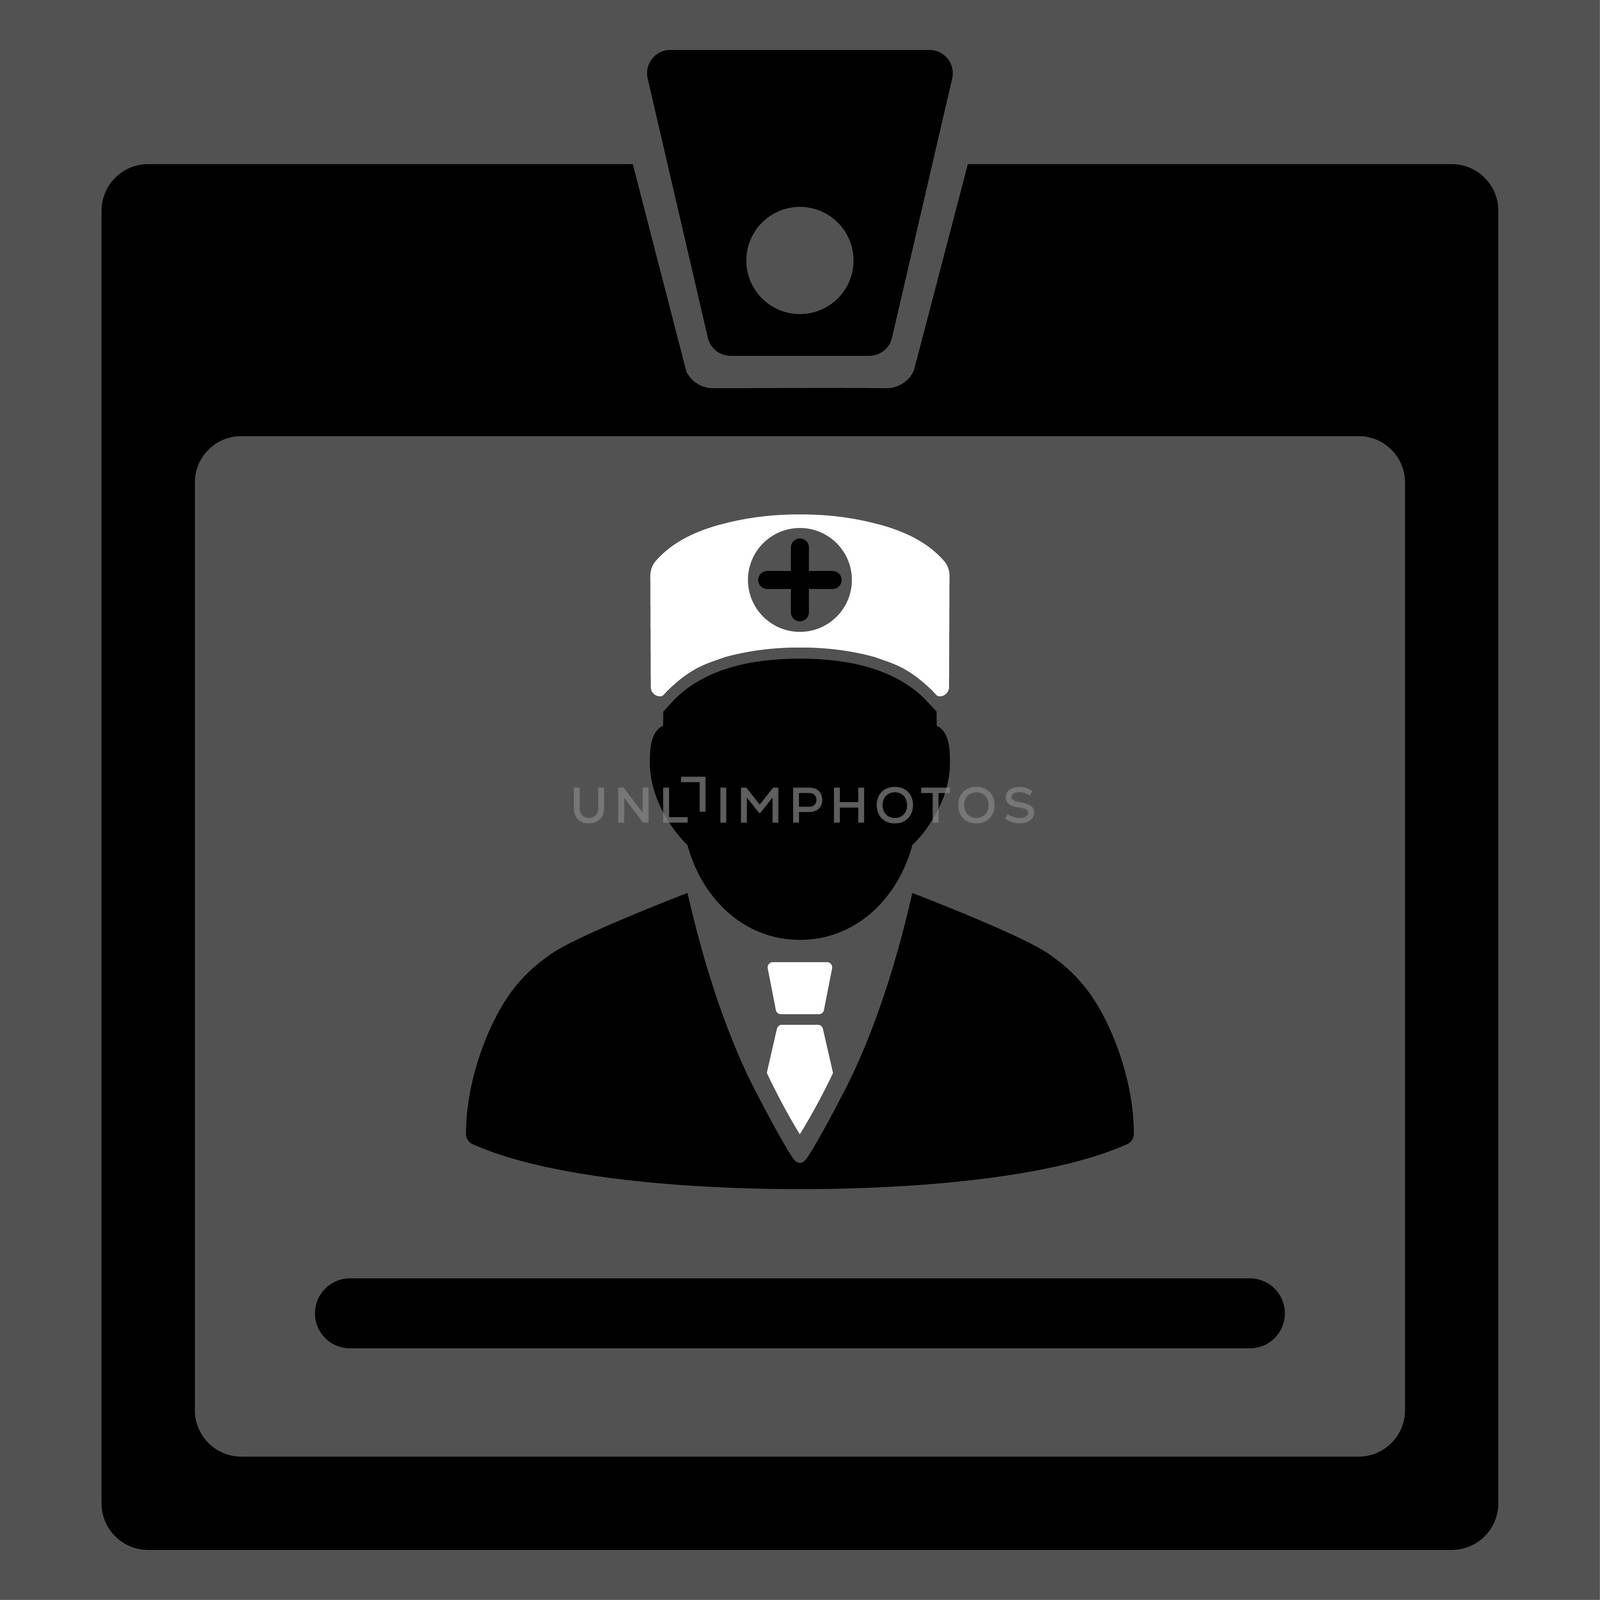 Doctor Badge raster icon. Style is bicolor flat symbol, black and white colors, rounded angles, gray background.